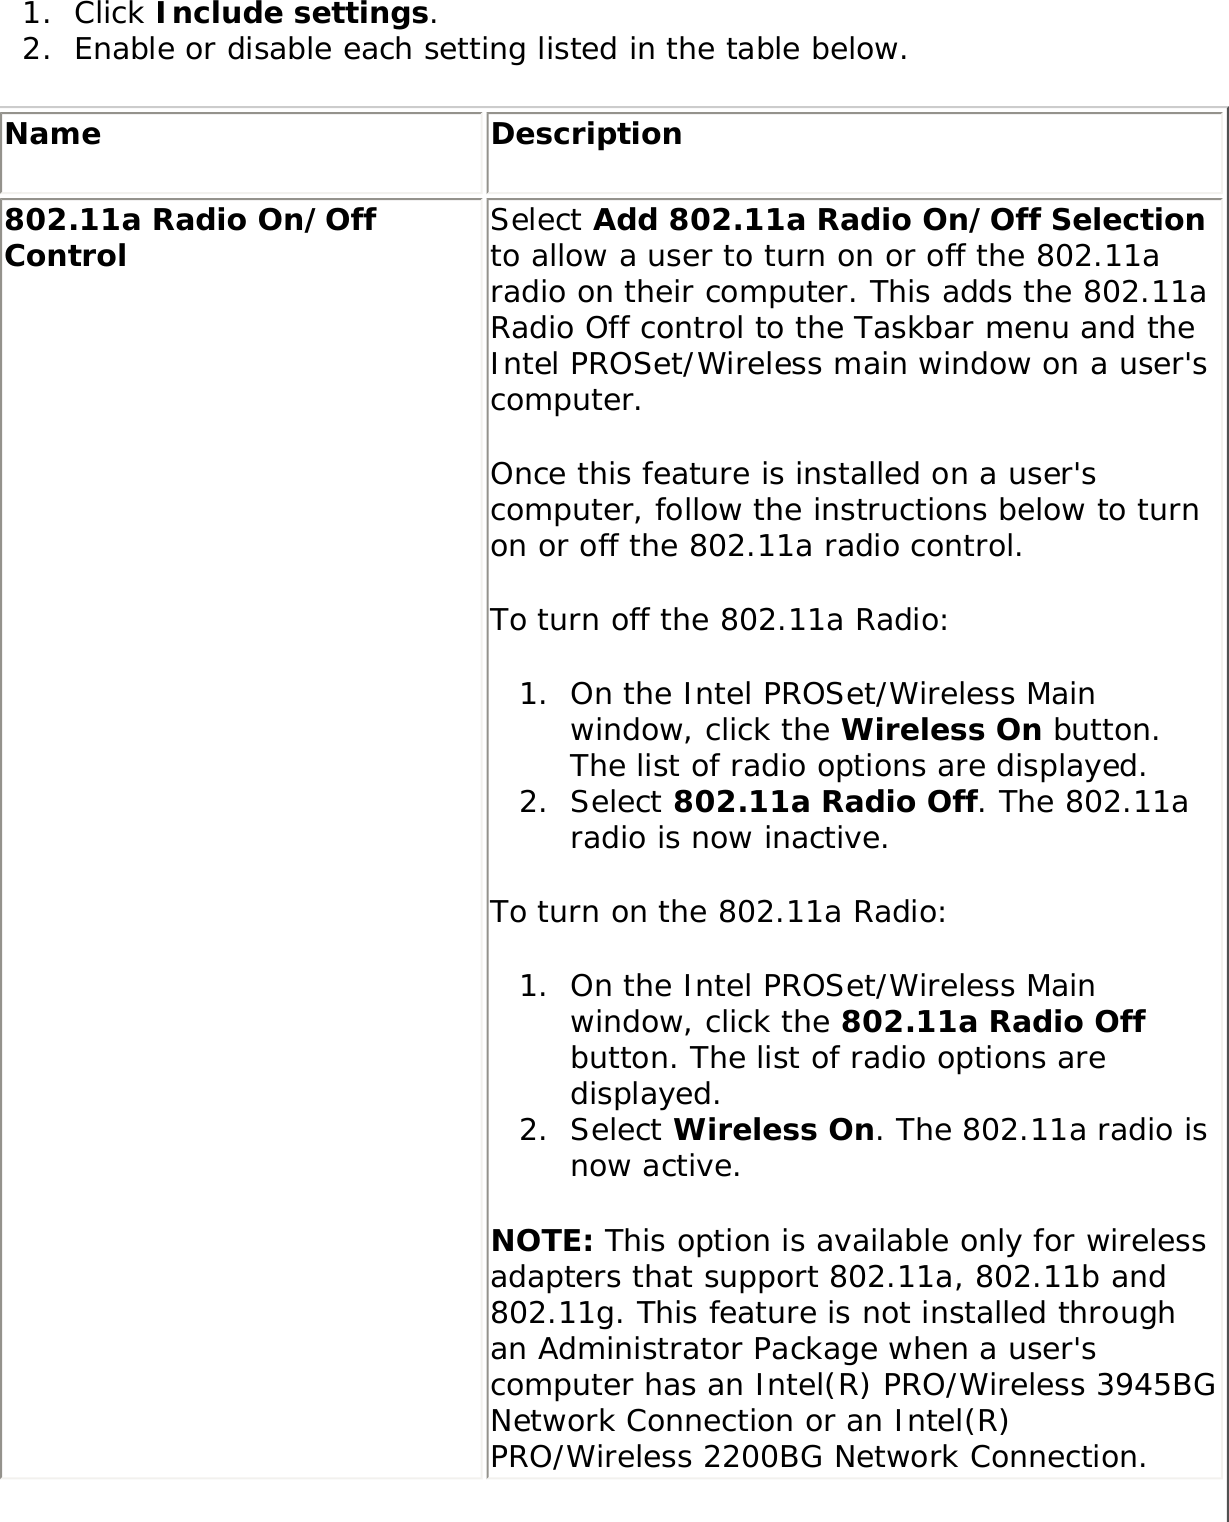 1.  Click Include settings. 2.  Enable or disable each setting listed in the table below. Name Description802.11a Radio On/Off Control  Select Add 802.11a Radio On/Off Selection to allow a user to turn on or off the 802.11a radio on their computer. This adds the 802.11a Radio Off control to the Taskbar menu and the Intel PROSet/Wireless main window on a user&apos;s computer. Once this feature is installed on a user&apos;s computer, follow the instructions below to turn on or off the 802.11a radio control. To turn off the 802.11a Radio: 1.  On the Intel PROSet/Wireless Main window, click the Wireless On button. The list of radio options are displayed. 2.  Select 802.11a Radio Off. The 802.11a radio is now inactive.To turn on the 802.11a Radio: 1.  On the Intel PROSet/Wireless Main window, click the 802.11a Radio Off button. The list of radio options are displayed. 2.  Select Wireless On. The 802.11a radio is now active. NOTE: This option is available only for wireless adapters that support 802.11a, 802.11b and 802.11g. This feature is not installed through an Administrator Package when a user&apos;s computer has an Intel(R) PRO/Wireless 3945BG Network Connection or an Intel(R) PRO/Wireless 2200BG Network Connection.